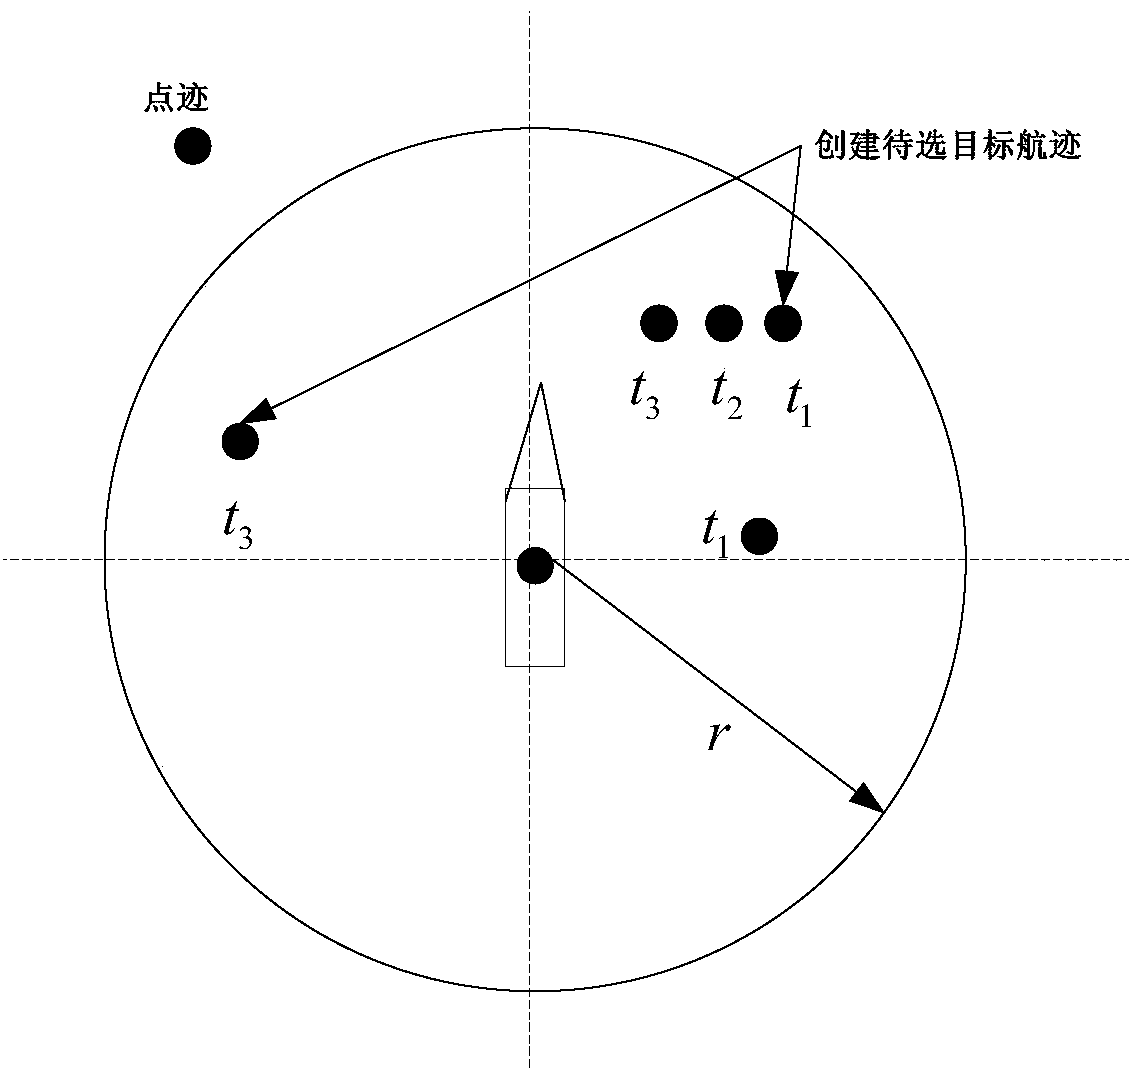 Target Tracking Method Based on Target Movement Situation Information Data Association Strategy